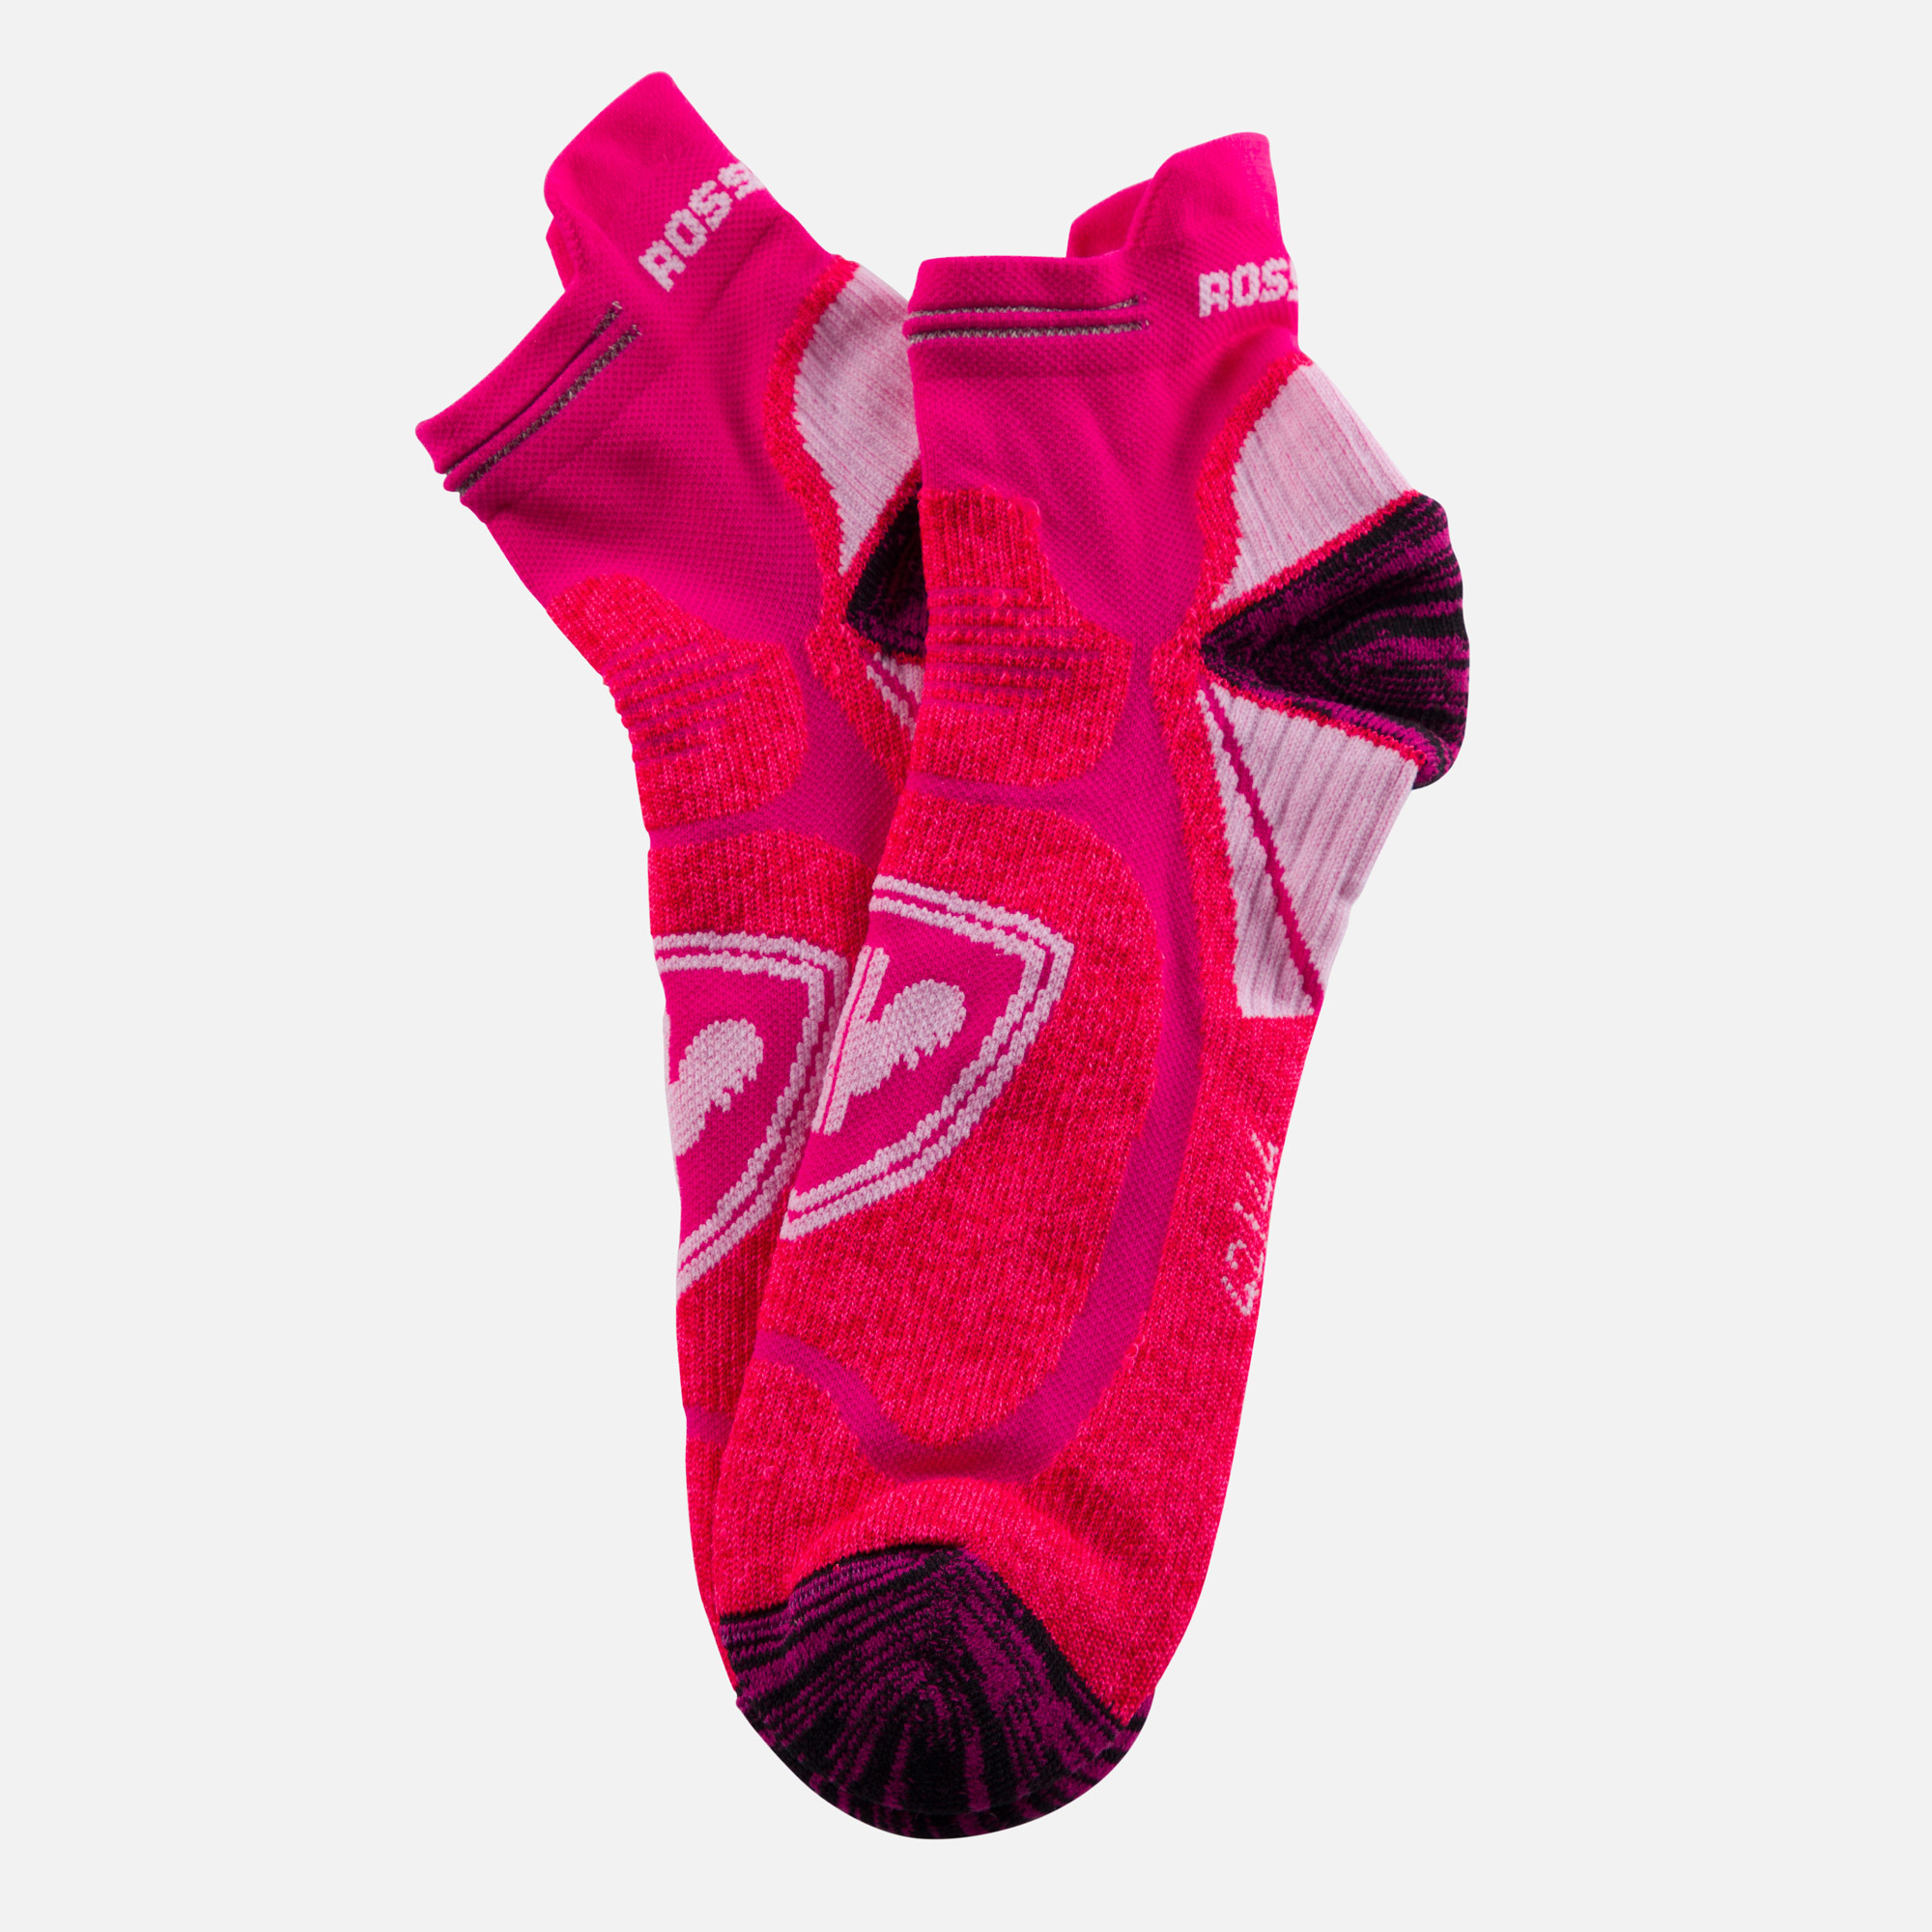 Calcetines de trail para mujer